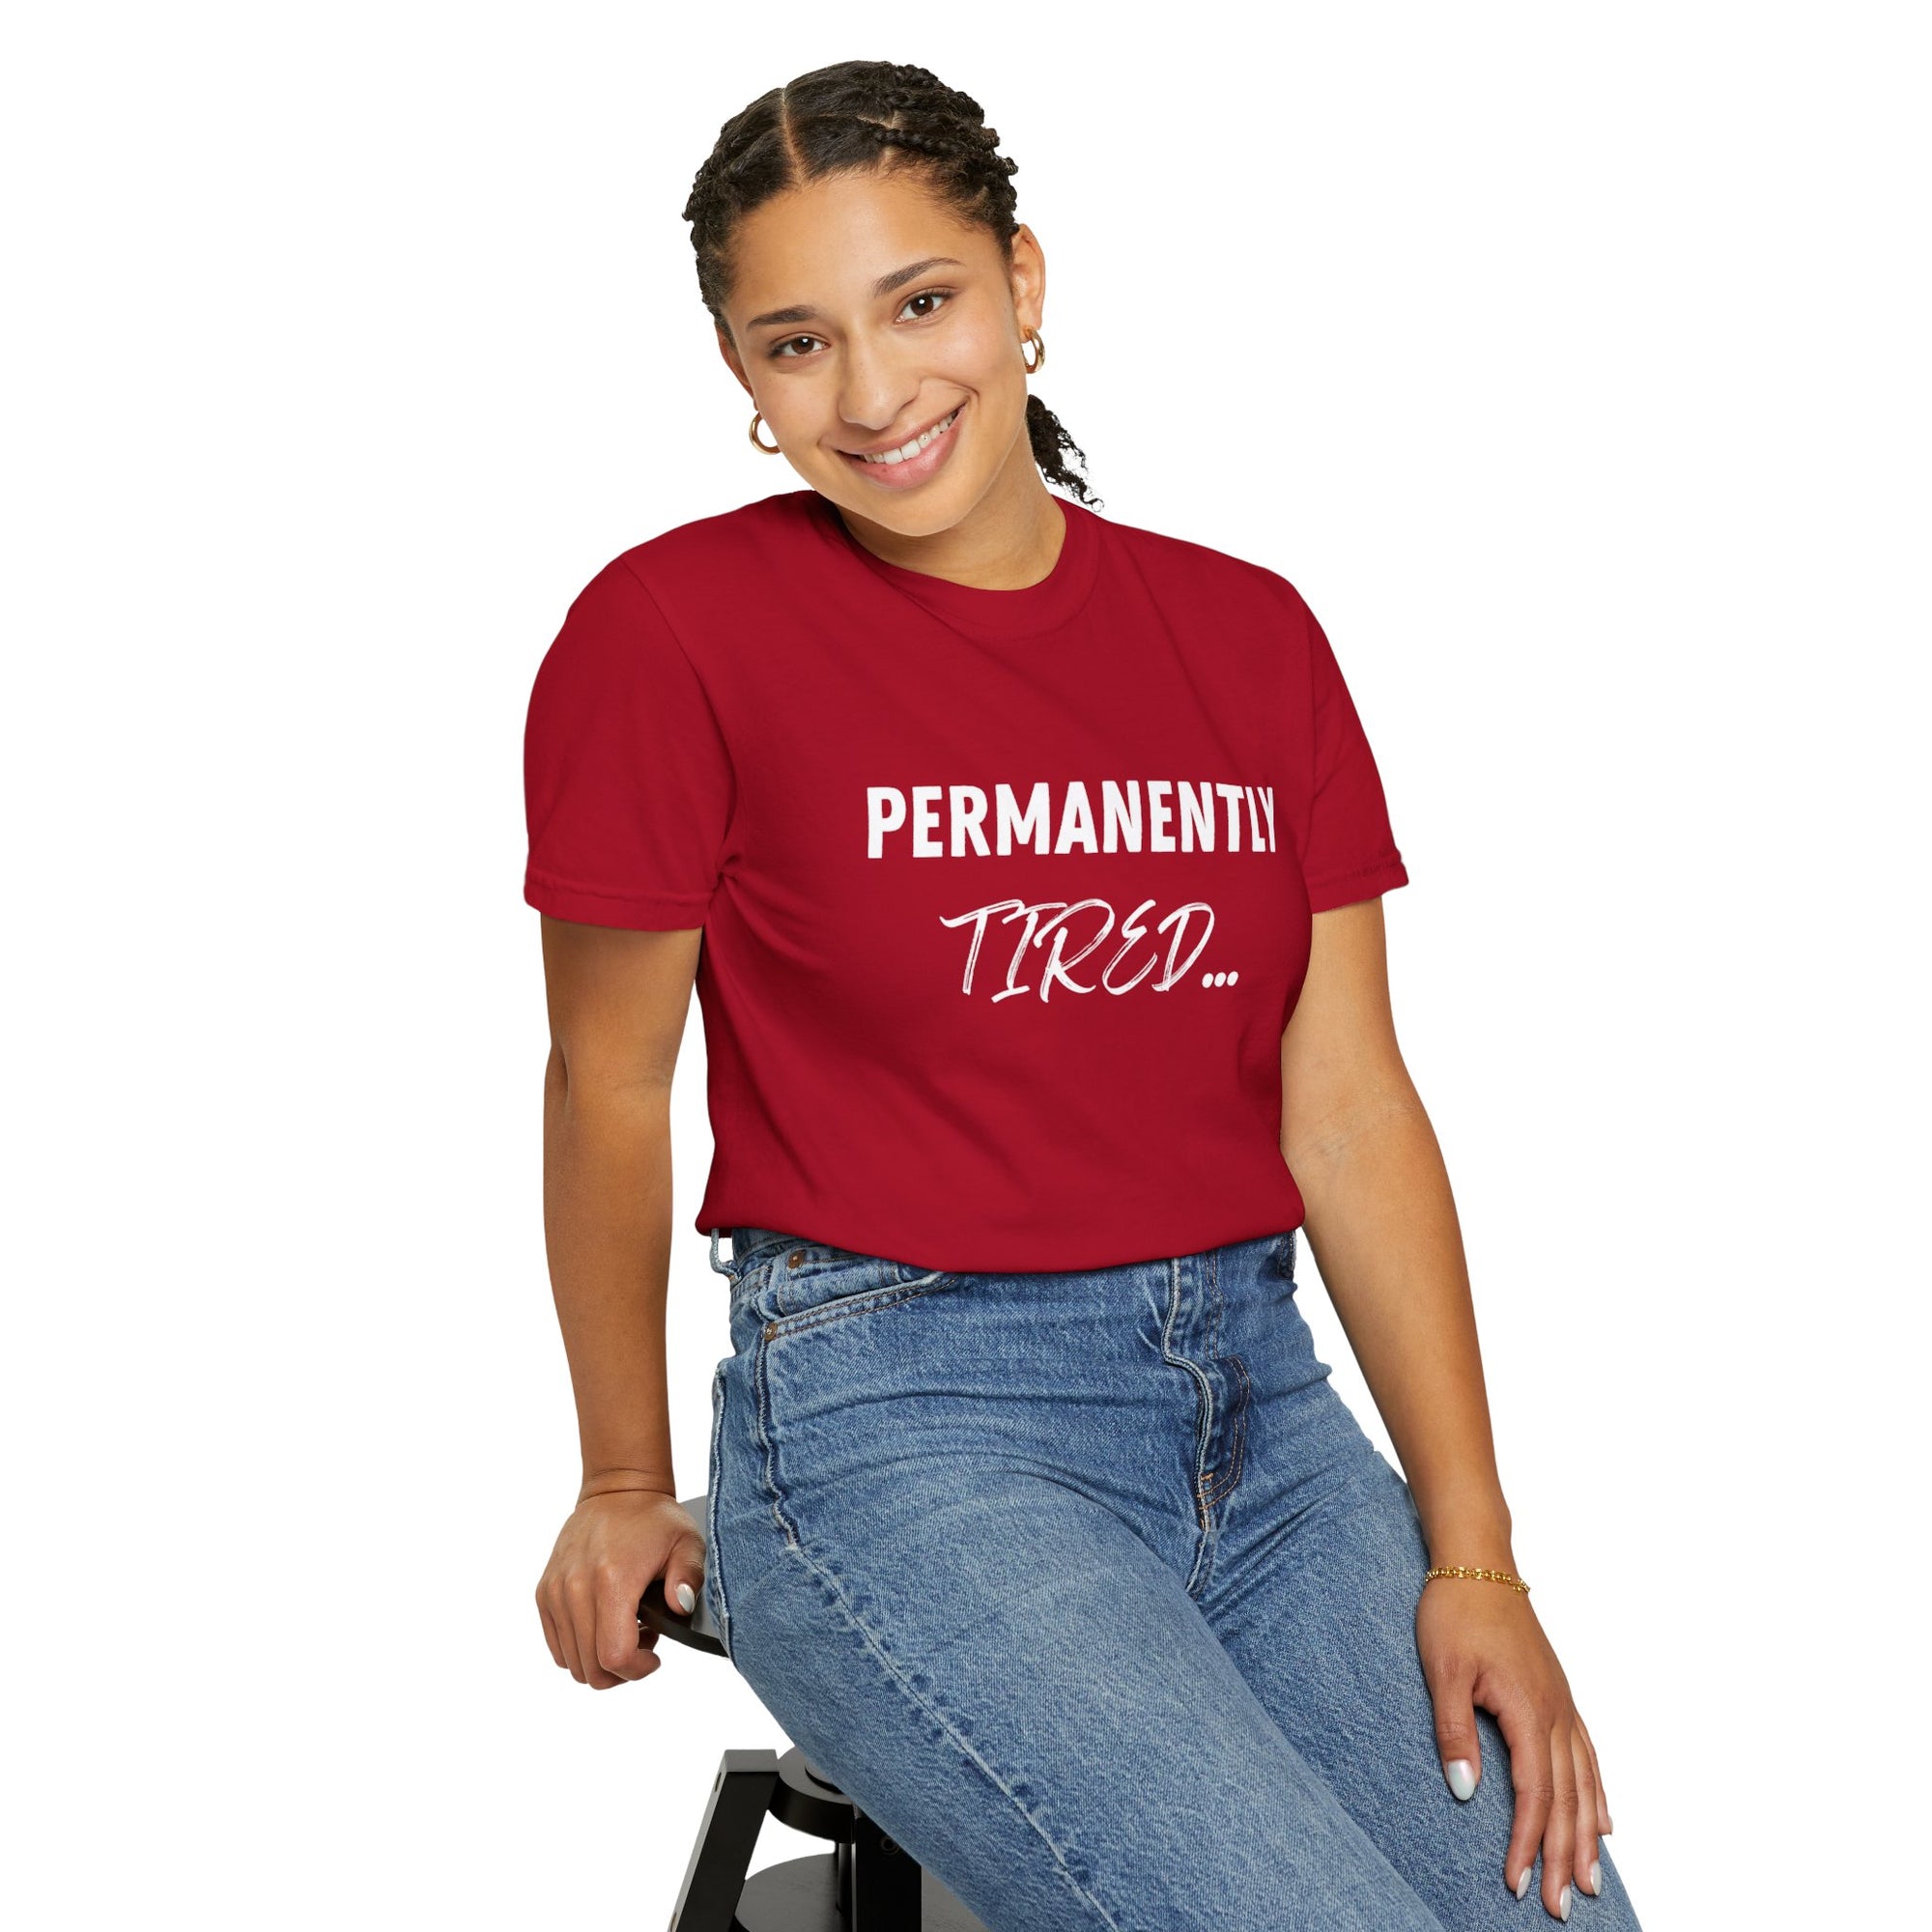 "Permanently Tired" T-shirt